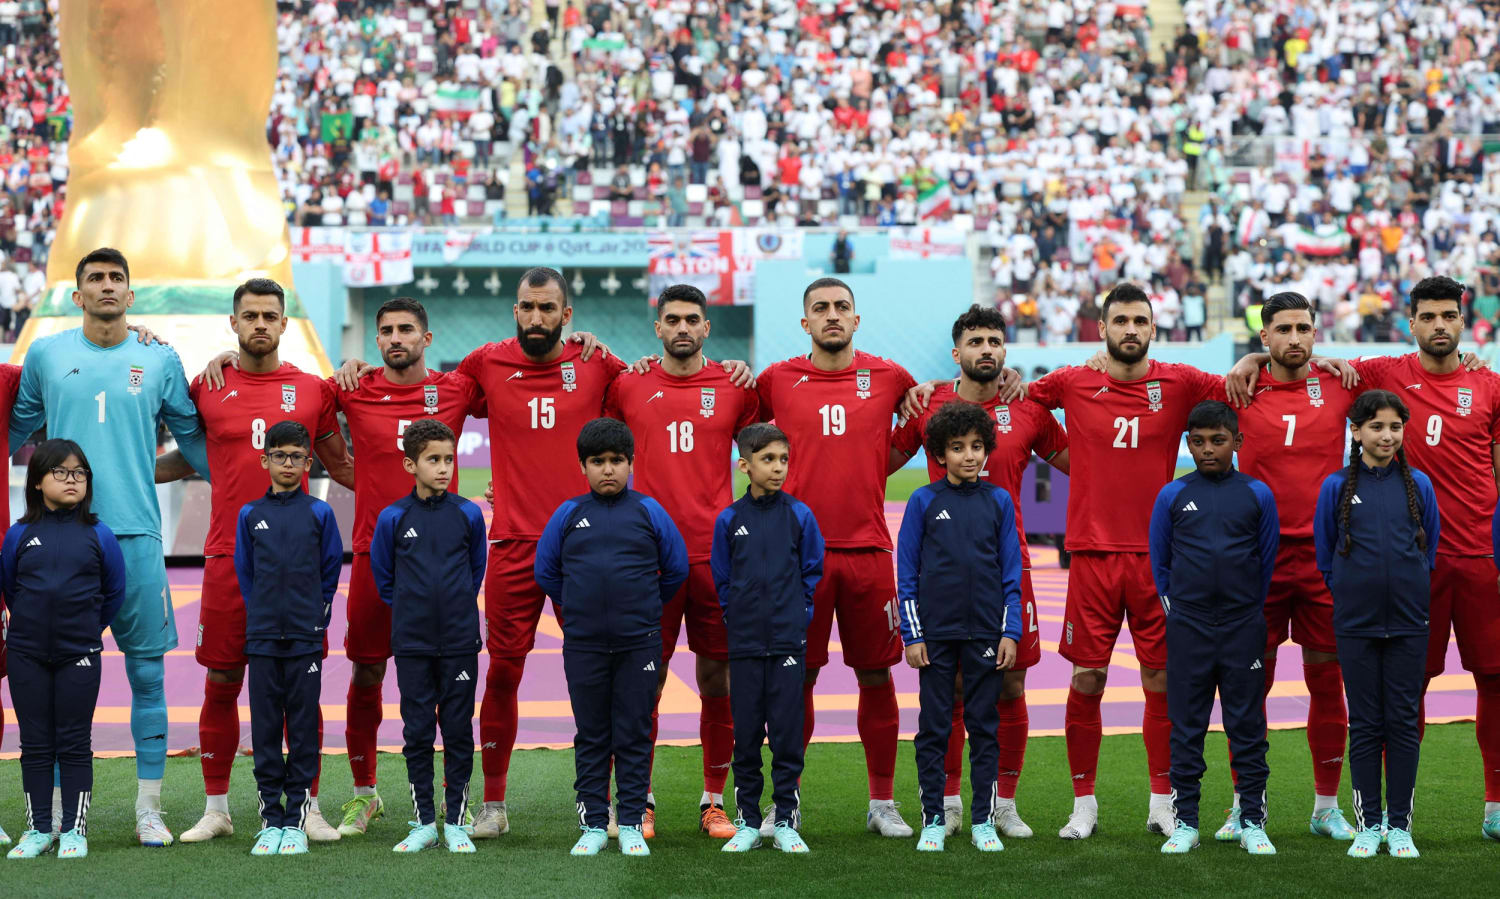 Iran soccer team silent during national anthem at World Cup game